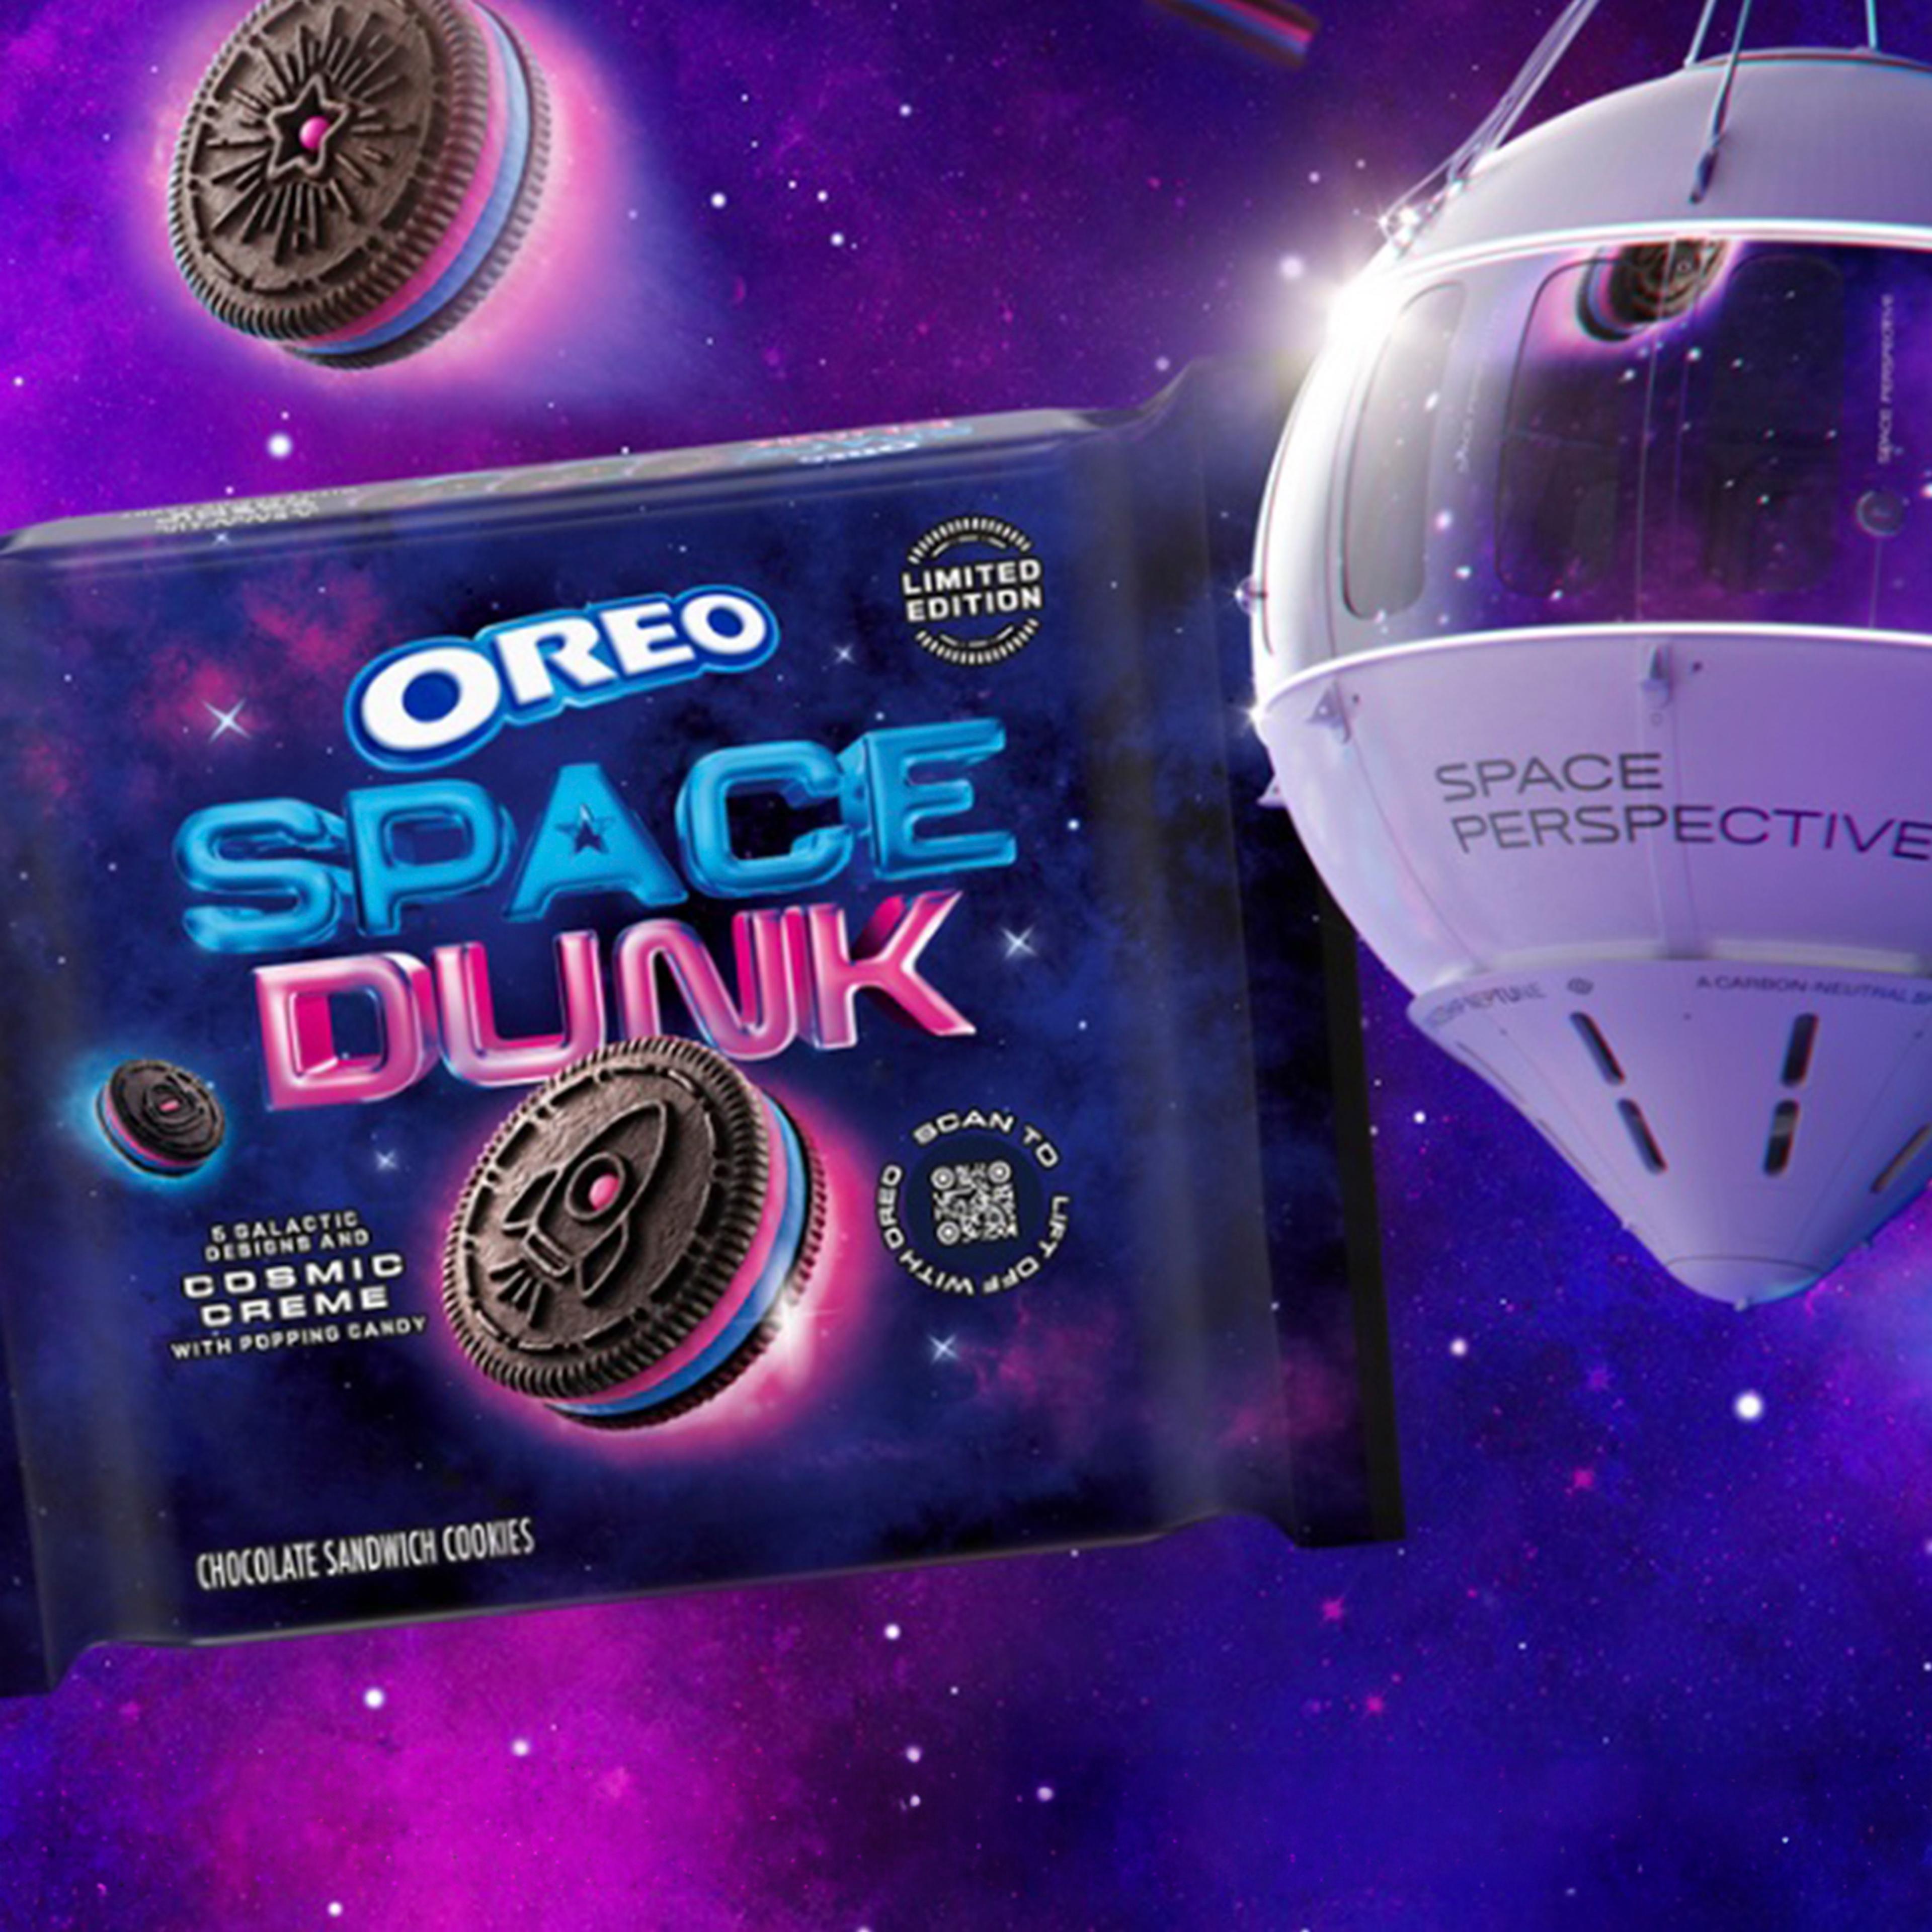 New York Post Features Our OREO Space Dunk Partnership